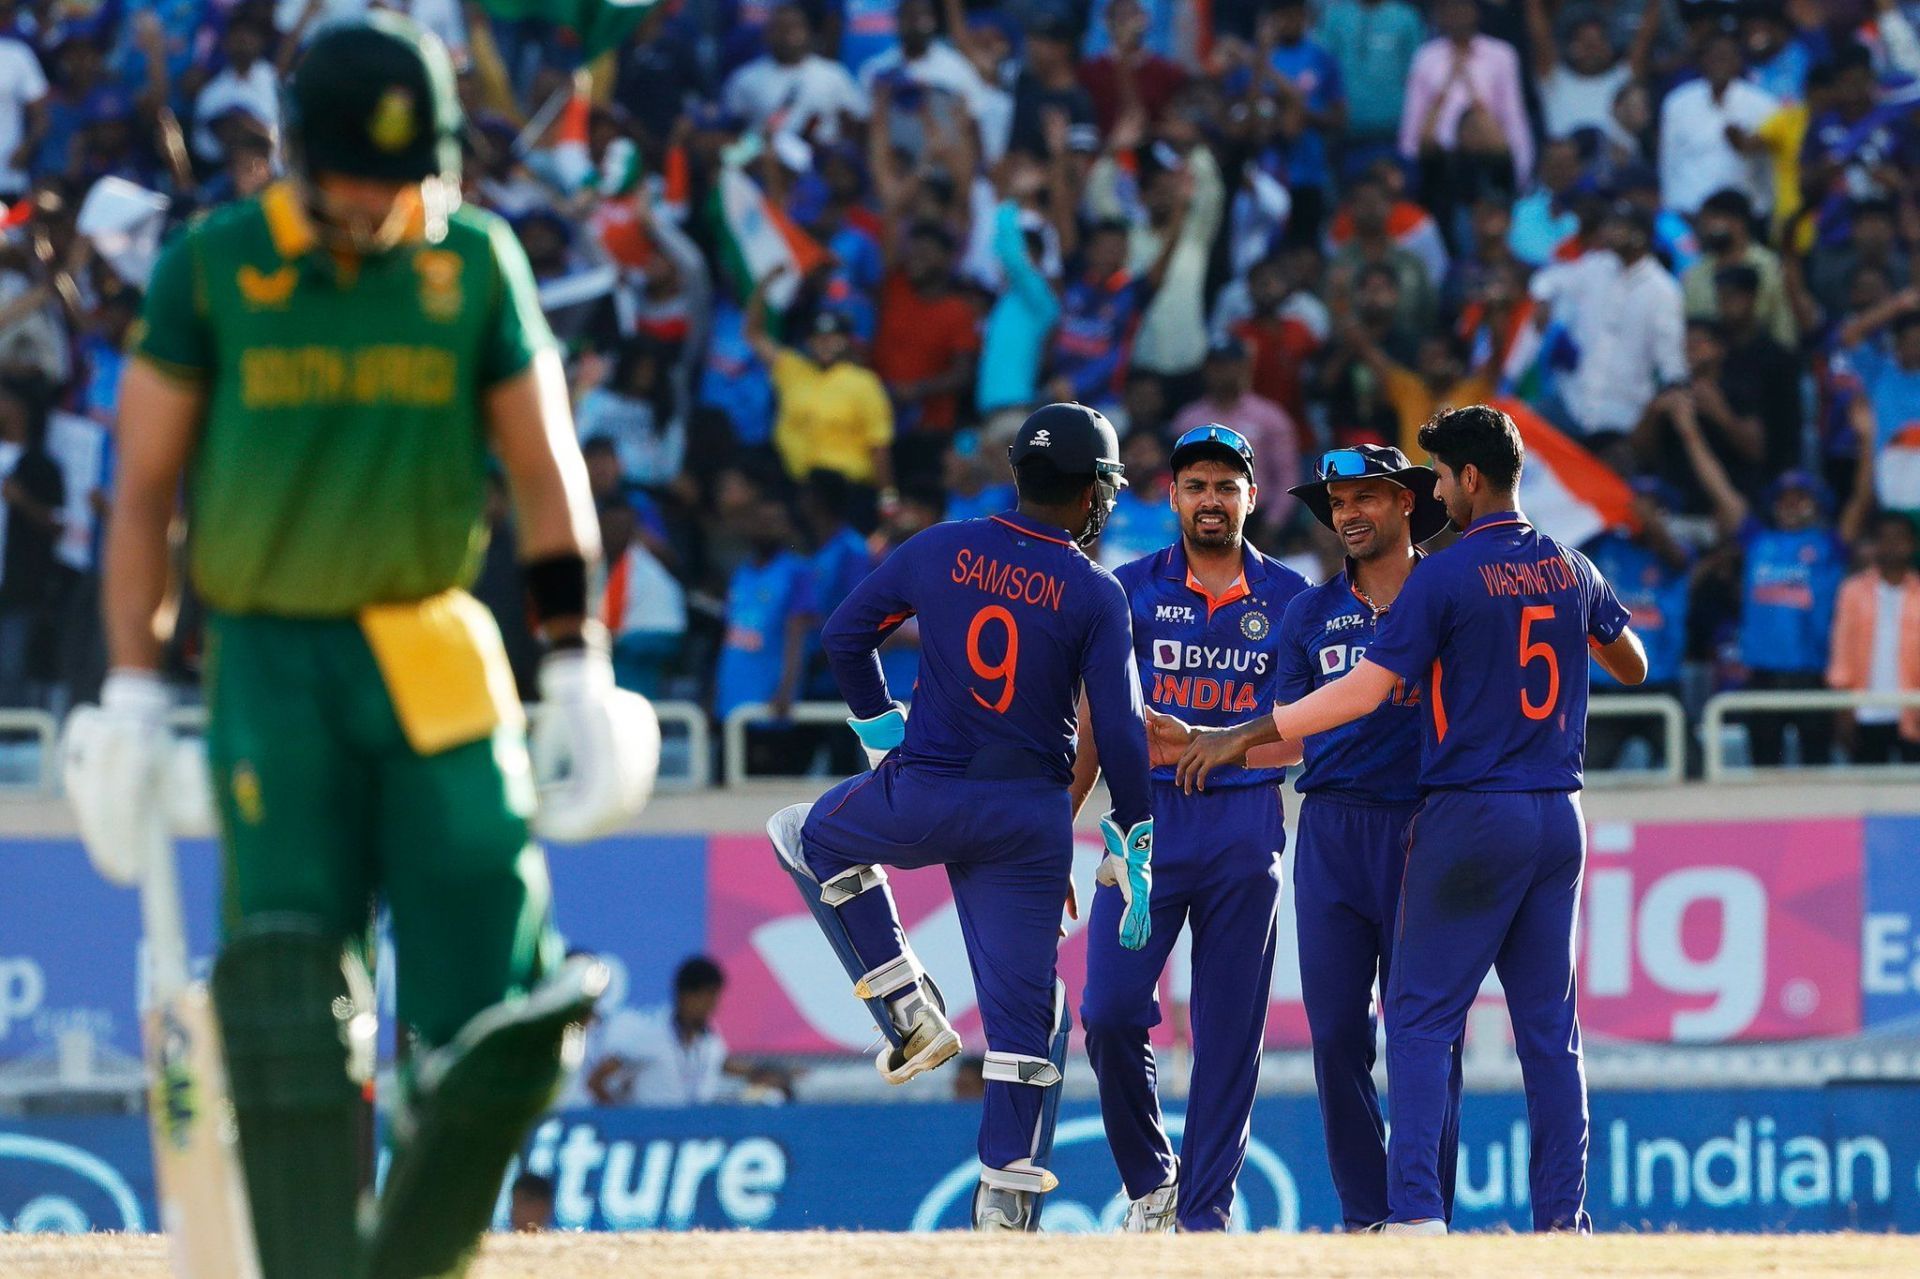 India leveled the series against South Africa with a seven-wicket win. (Credits: Twitter)